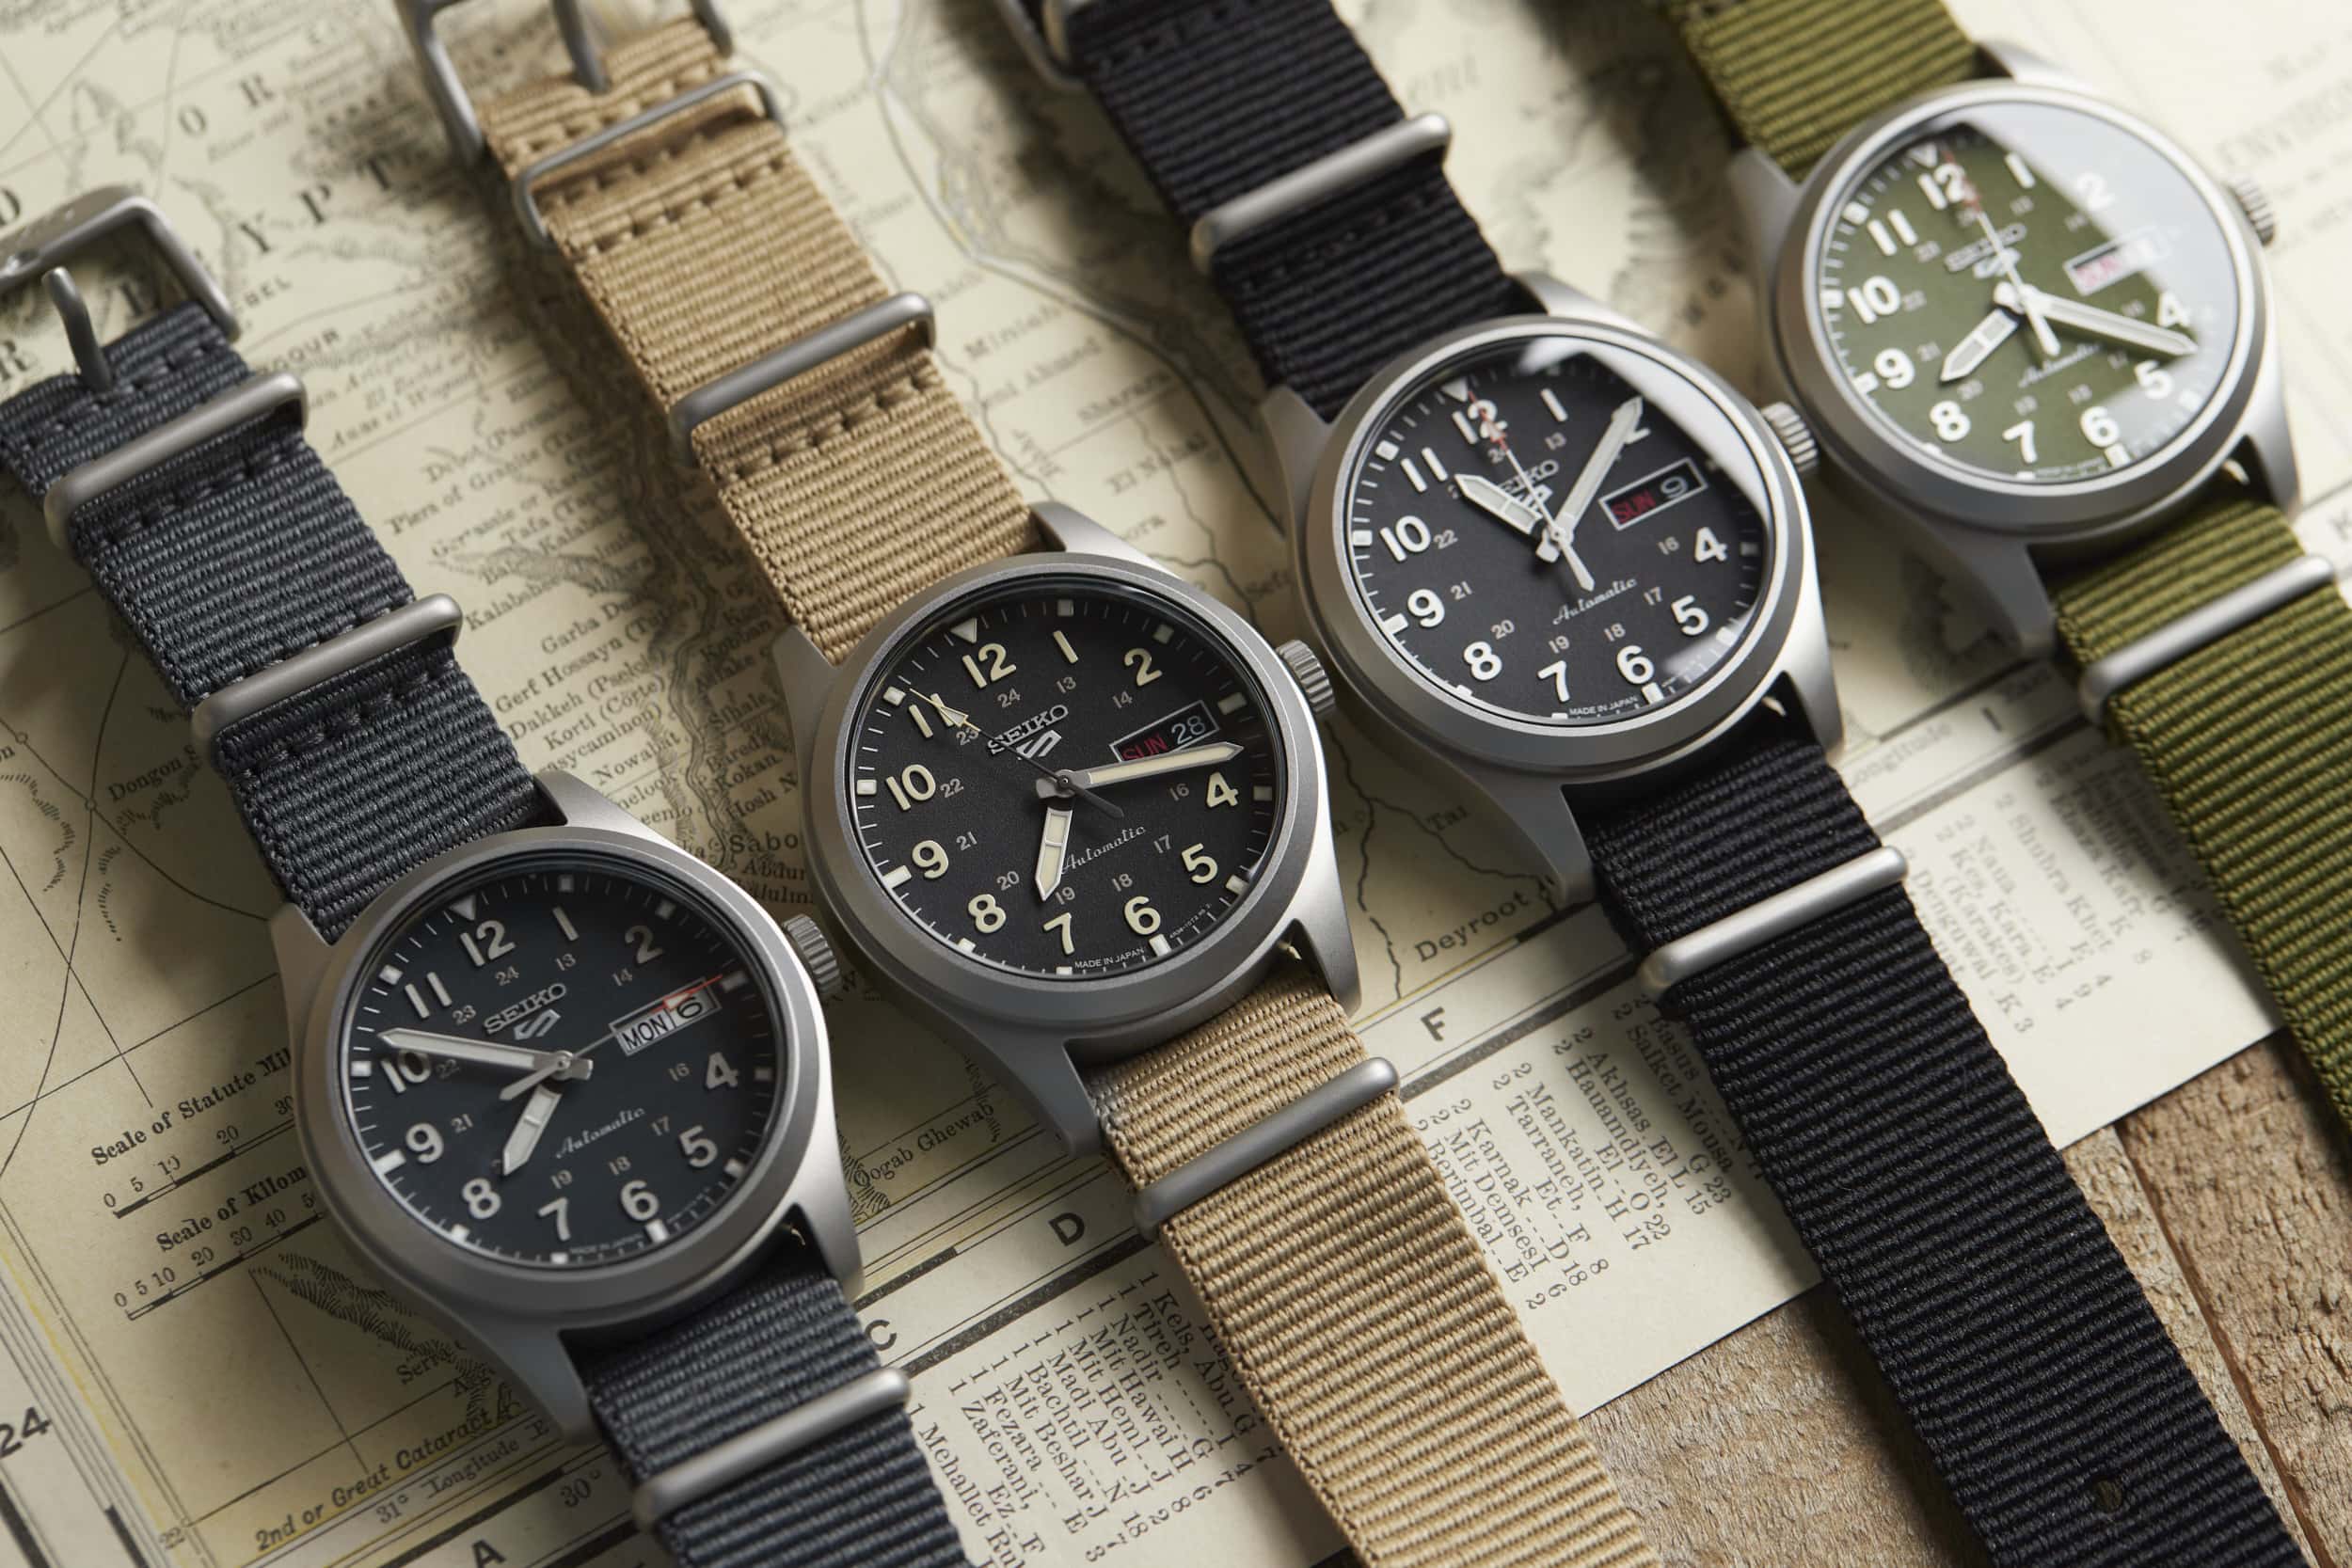 Seiko Prospex, Presage, and Seiko 5 Watches are Now Available at the Windup  Watch Shop - Worn & Wound